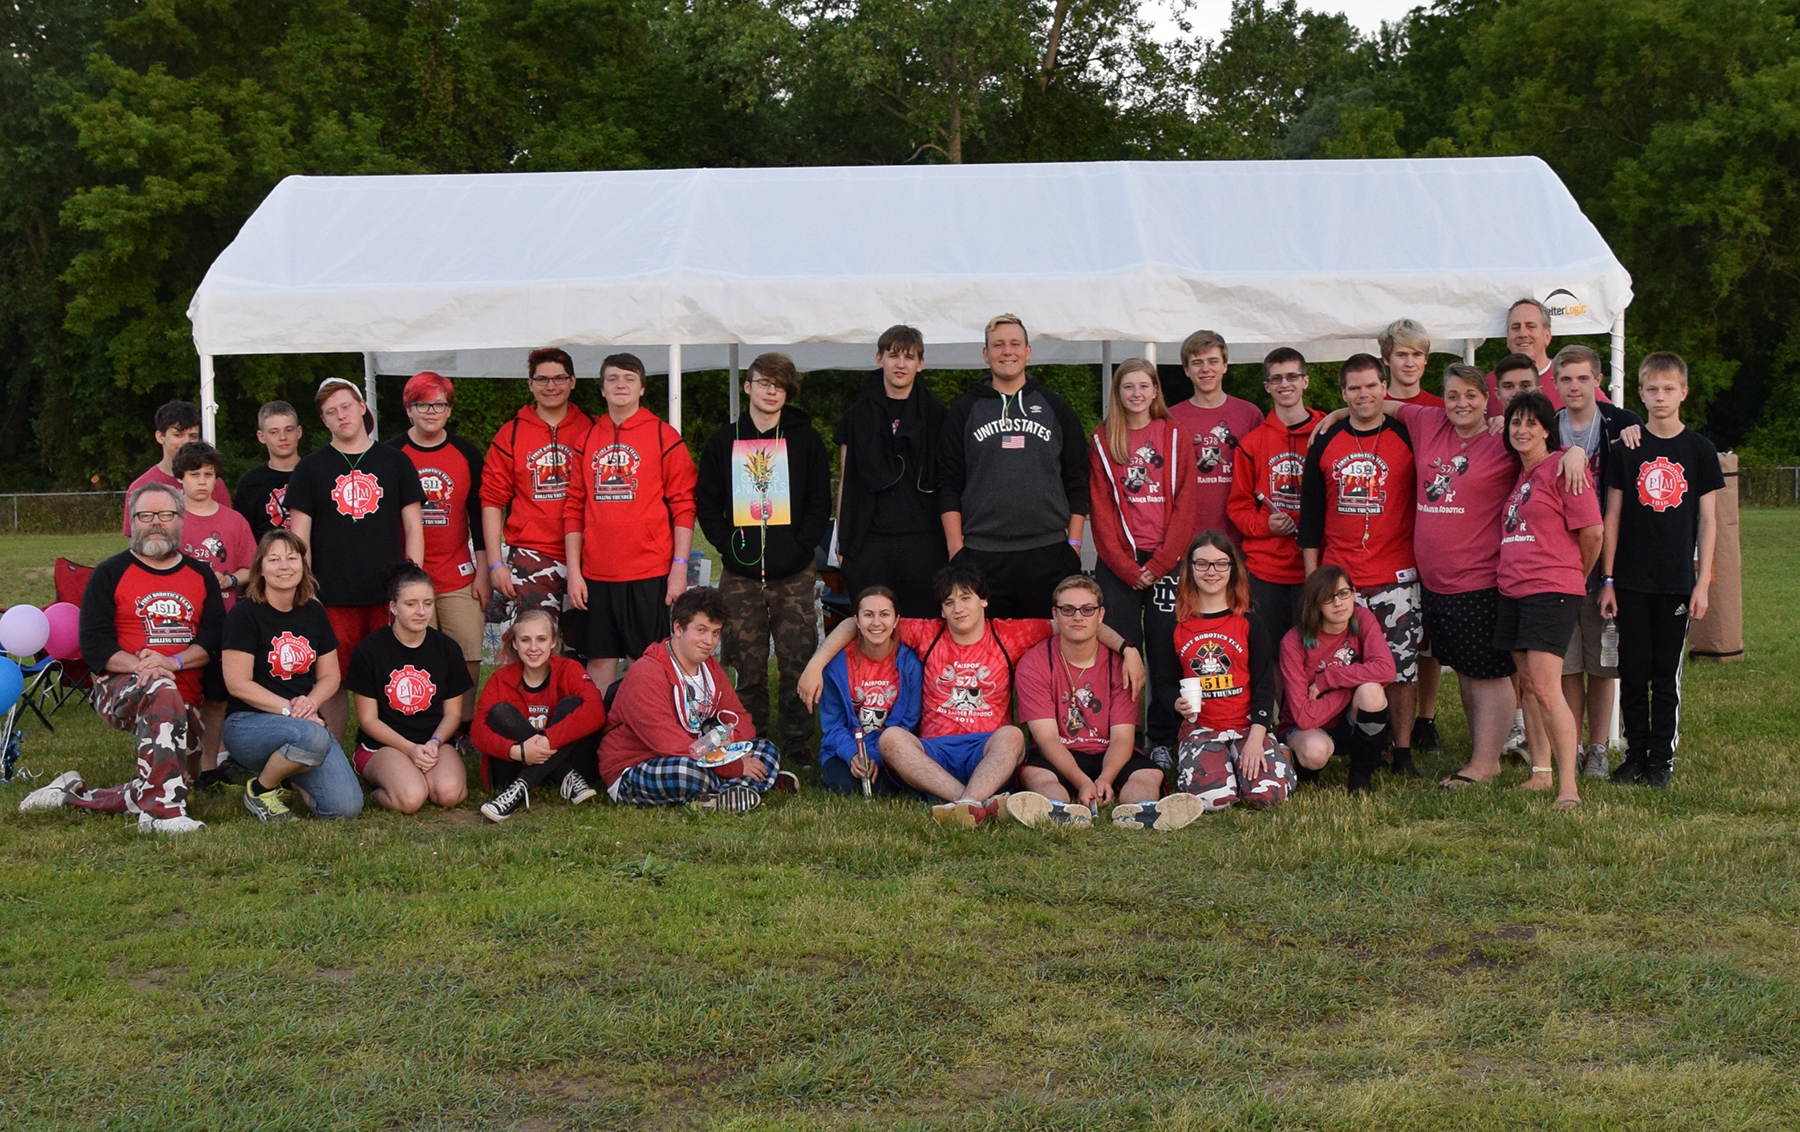 Outdoor group photo of 3 FIRST teams at Robotics Relay for a Reason